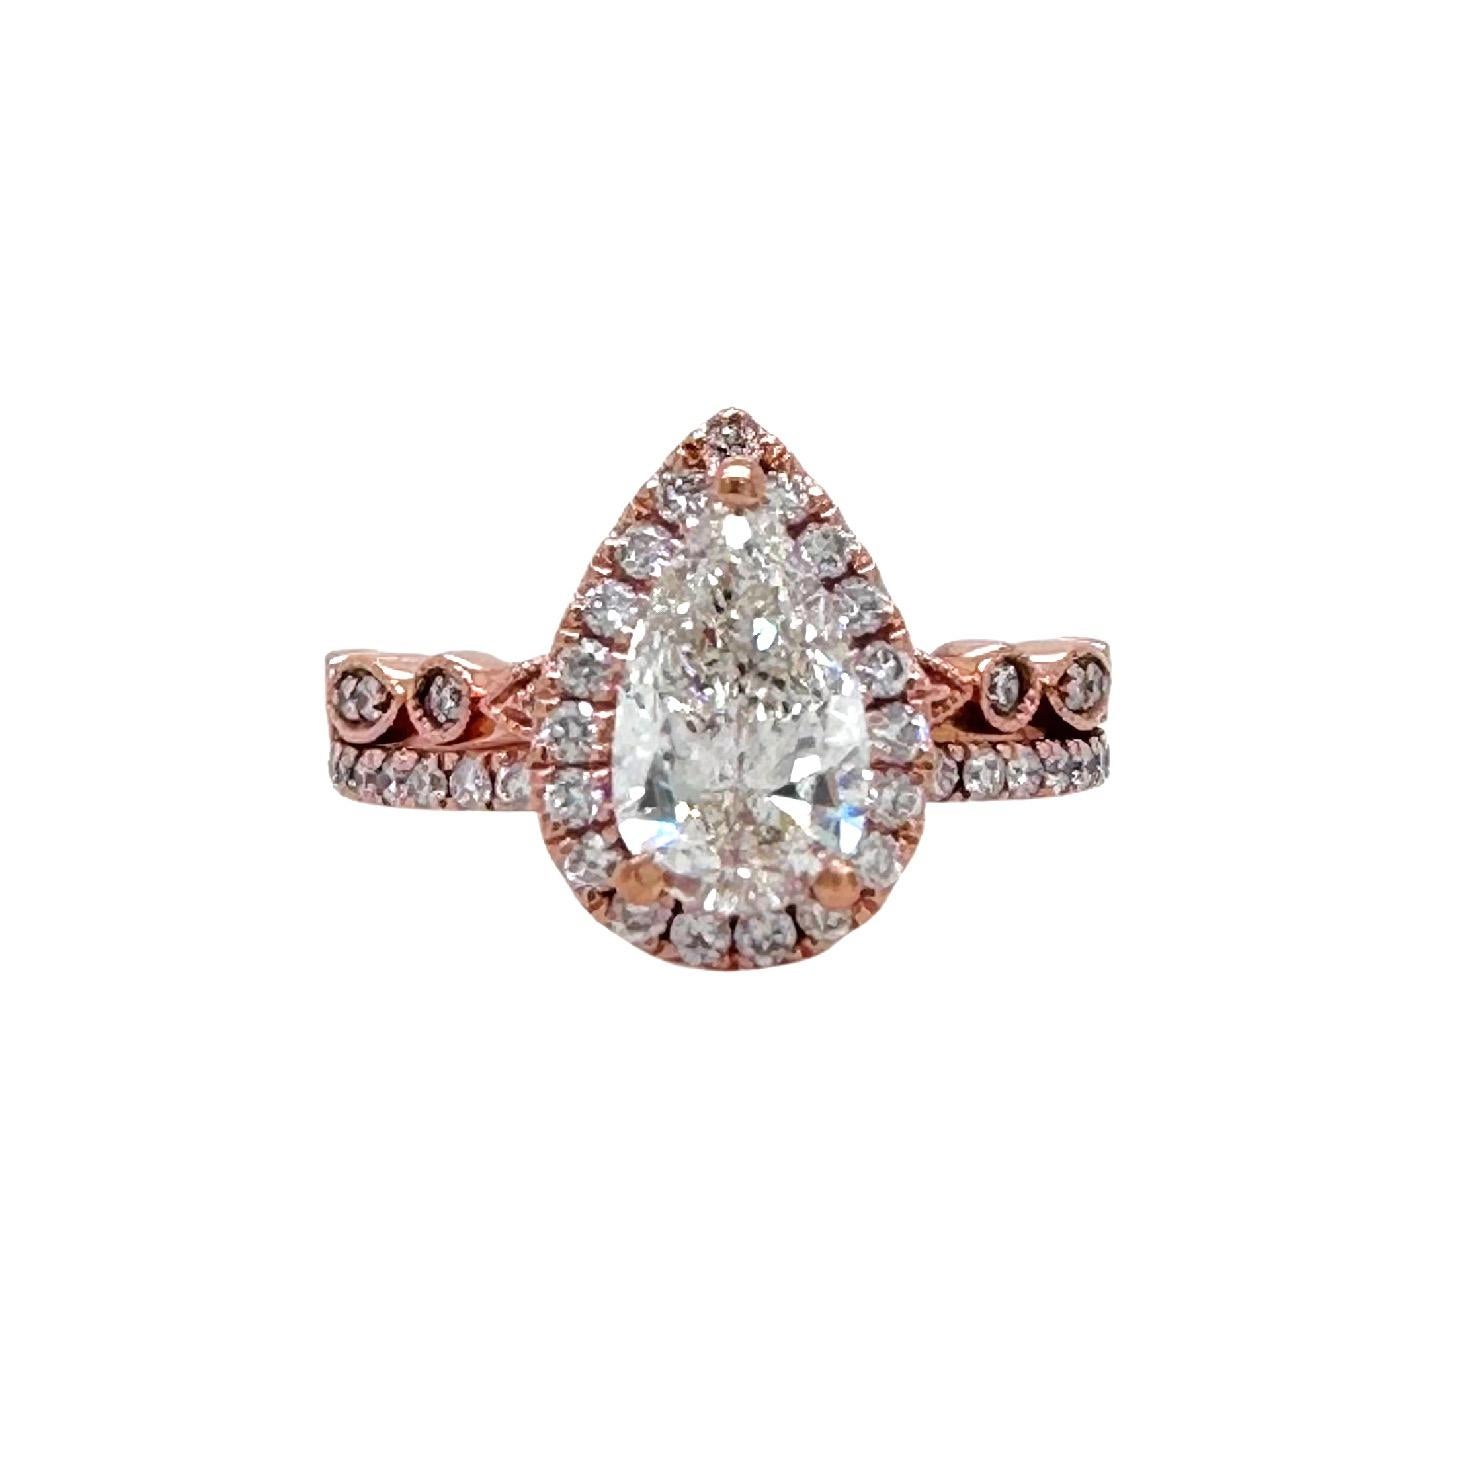 Robins Brothers Signature Pear Diamond 1.375tcw 14k Rose Gold Engagement Ring In Excellent Condition For Sale In San Diego, CA